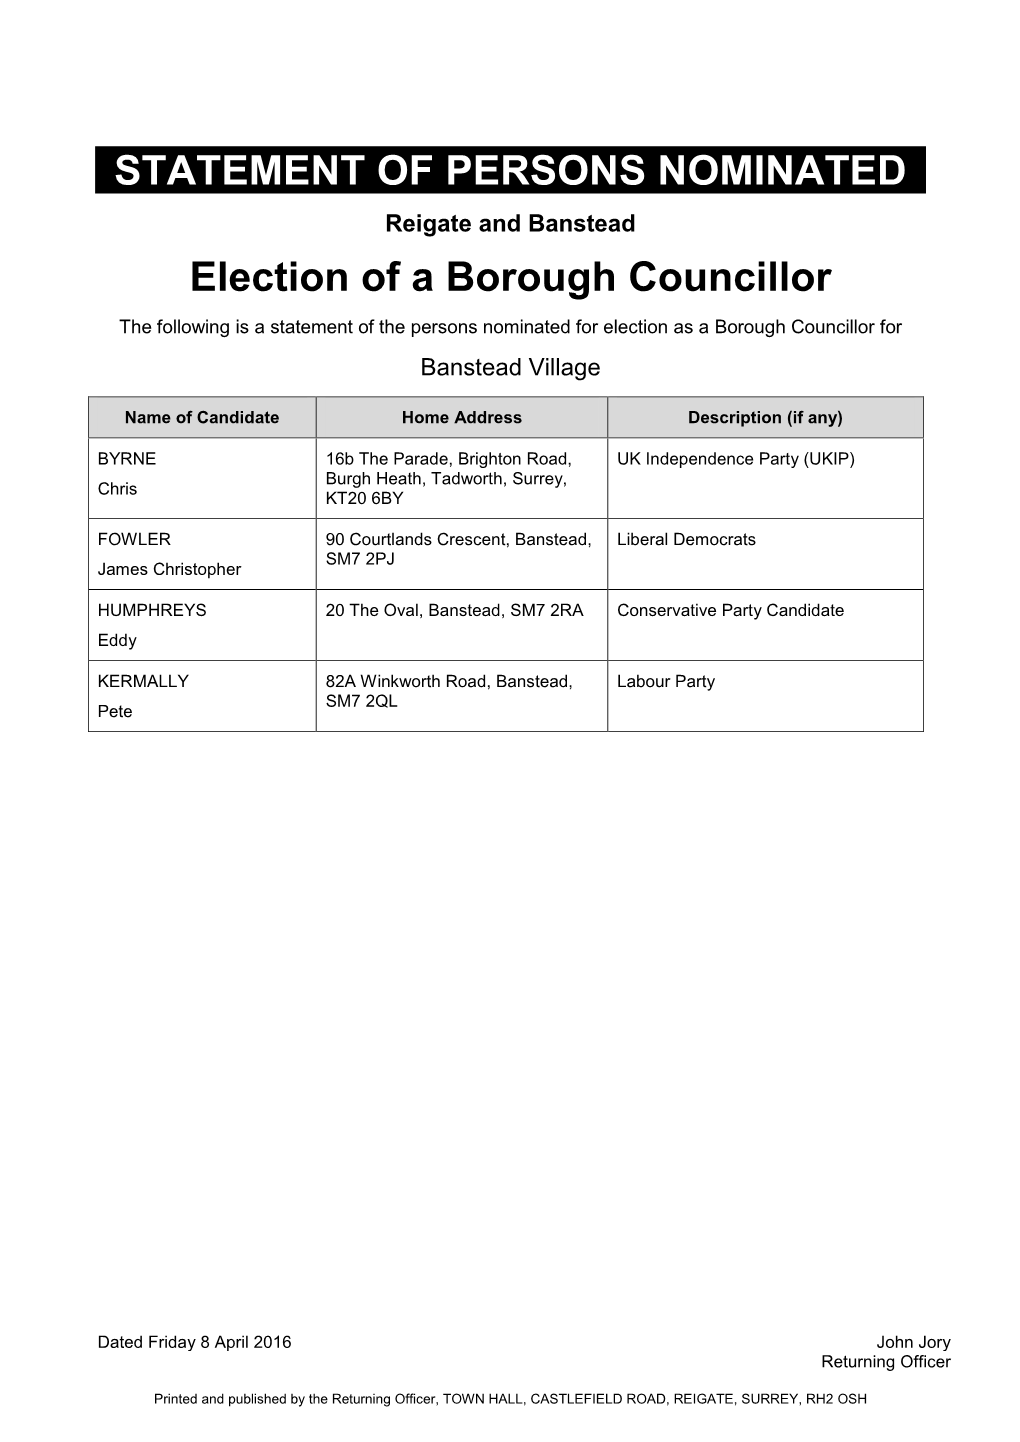 STATEMENT of PERSONS NOMINATED Election of a Borough